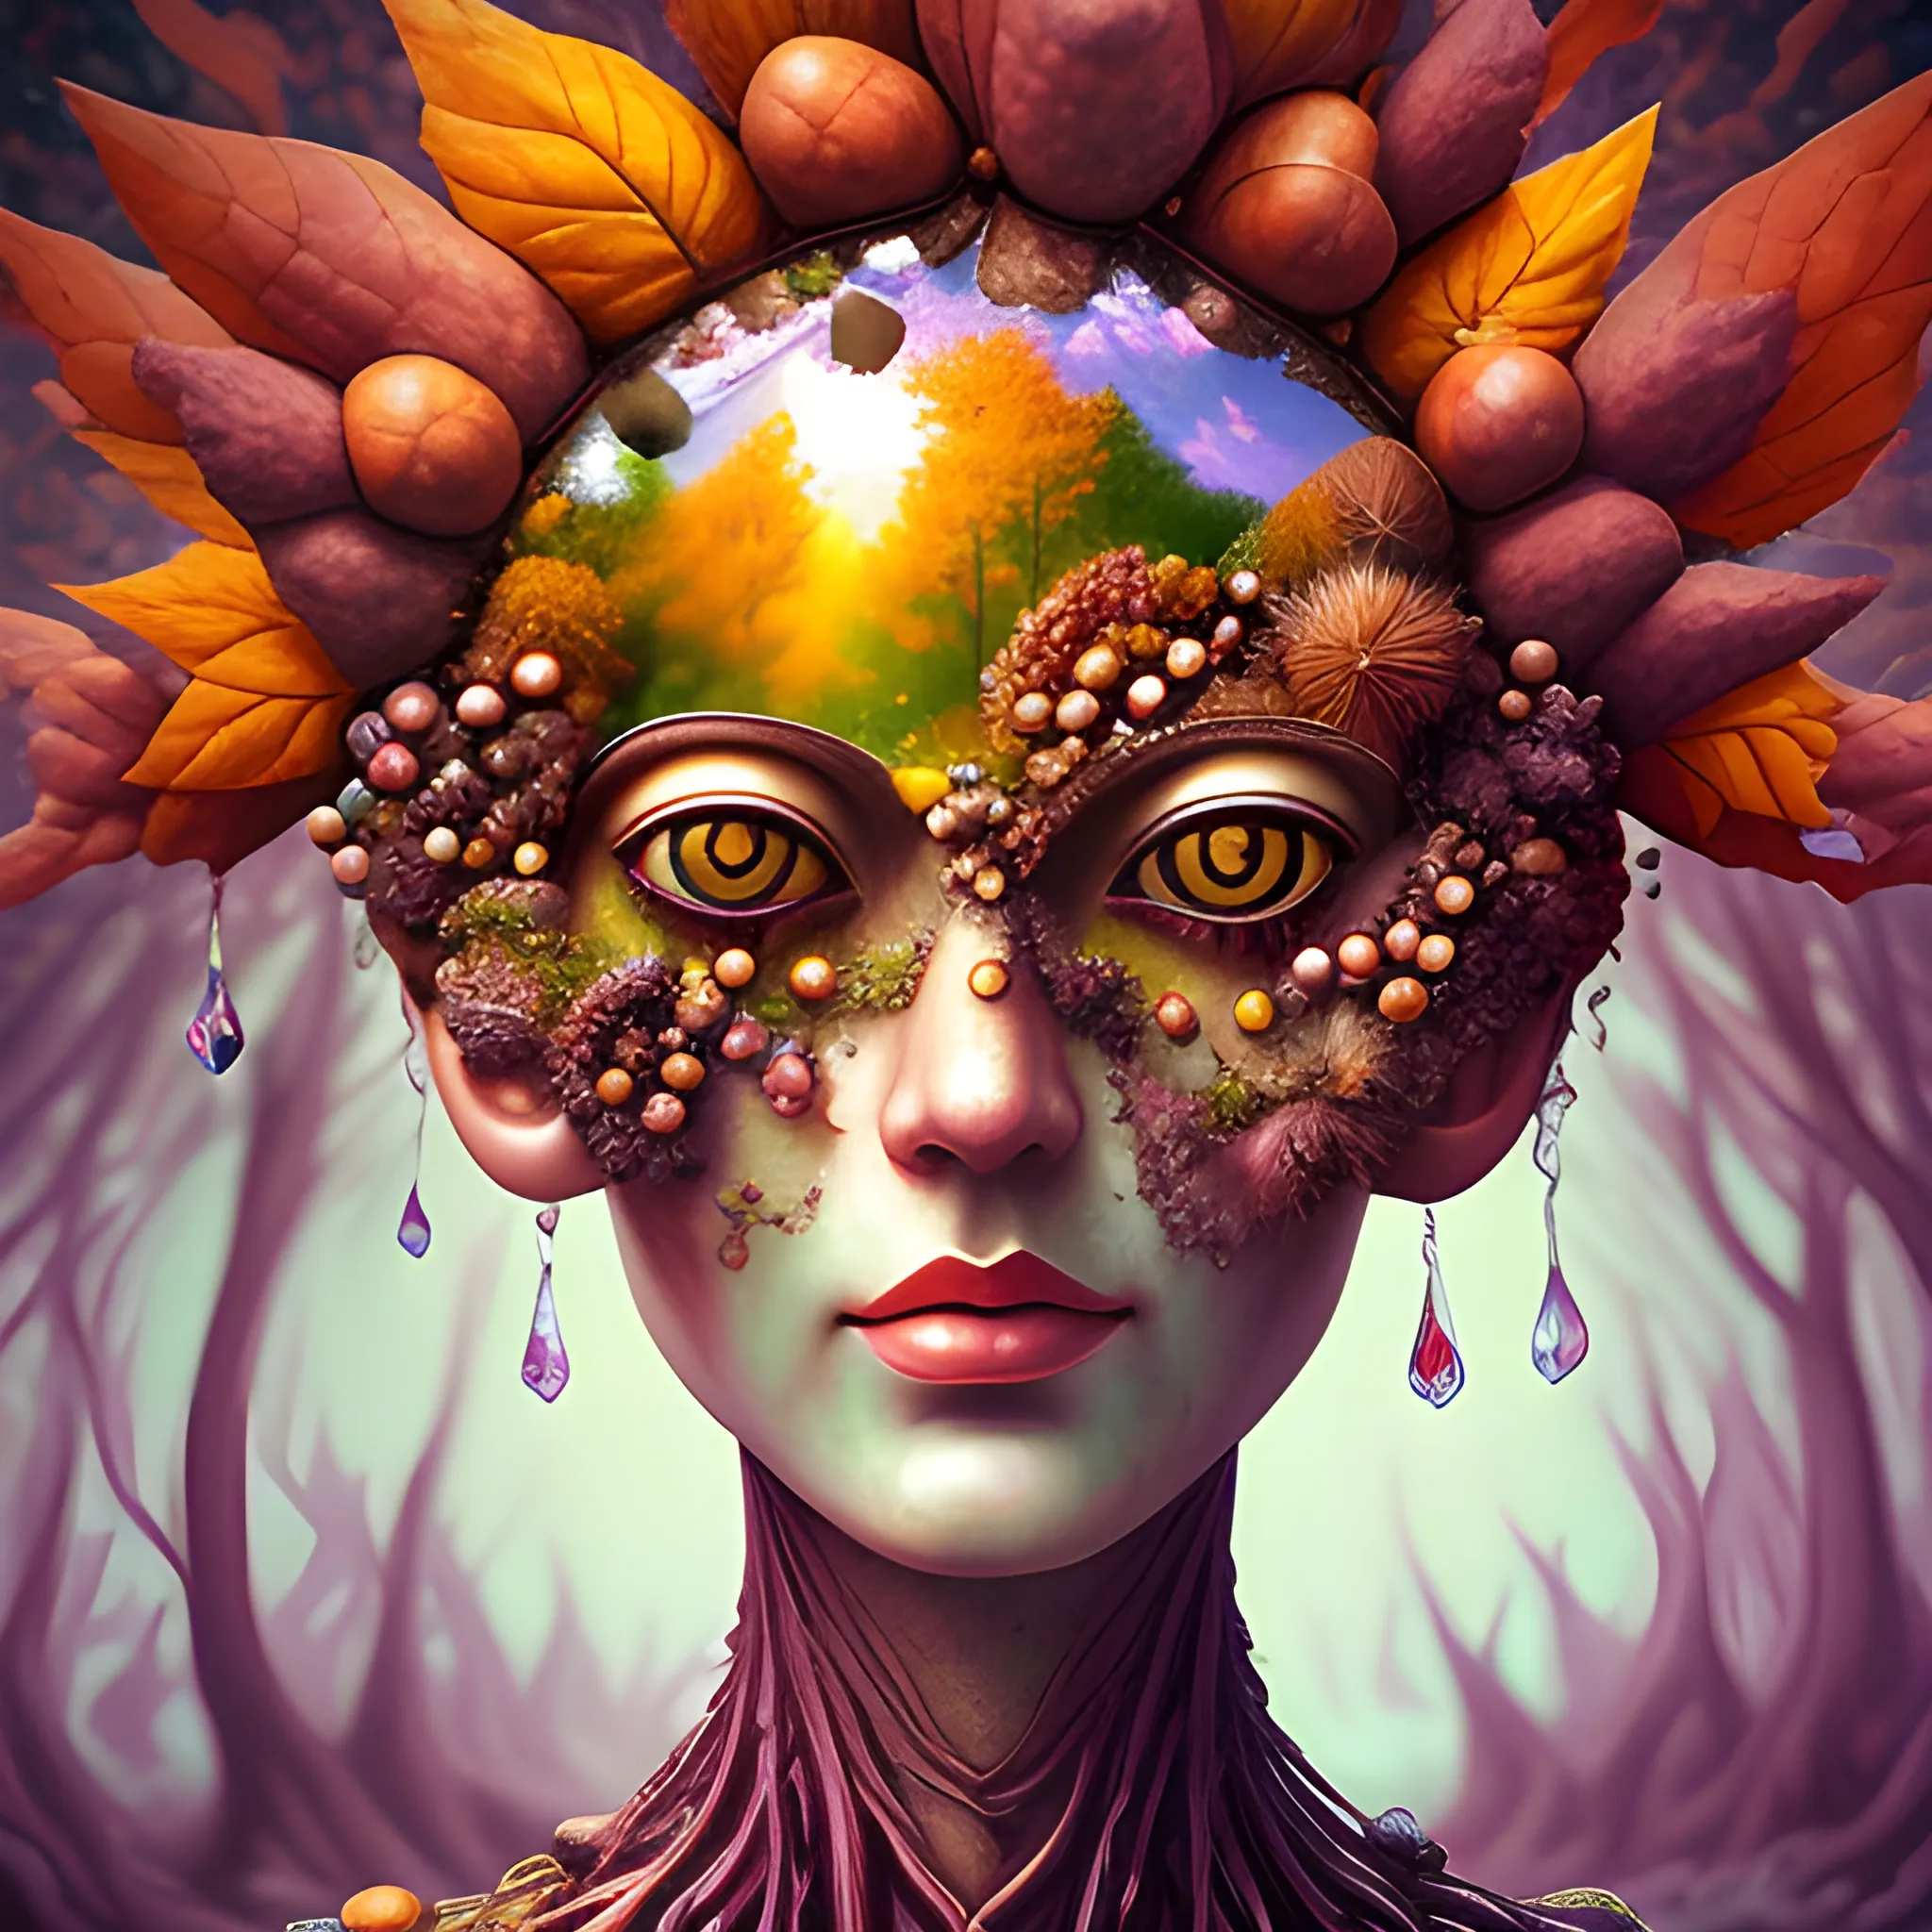 create a crystal statue of a female human face to look like many crazy chestnuts, close up, saturated colors, surrealism, chaotic background many chestnuts and chestnut leaves floating around  3D, Trippy, eerie atmosphere, close up, illustration, angular perspective, Oil Painting, Water Color